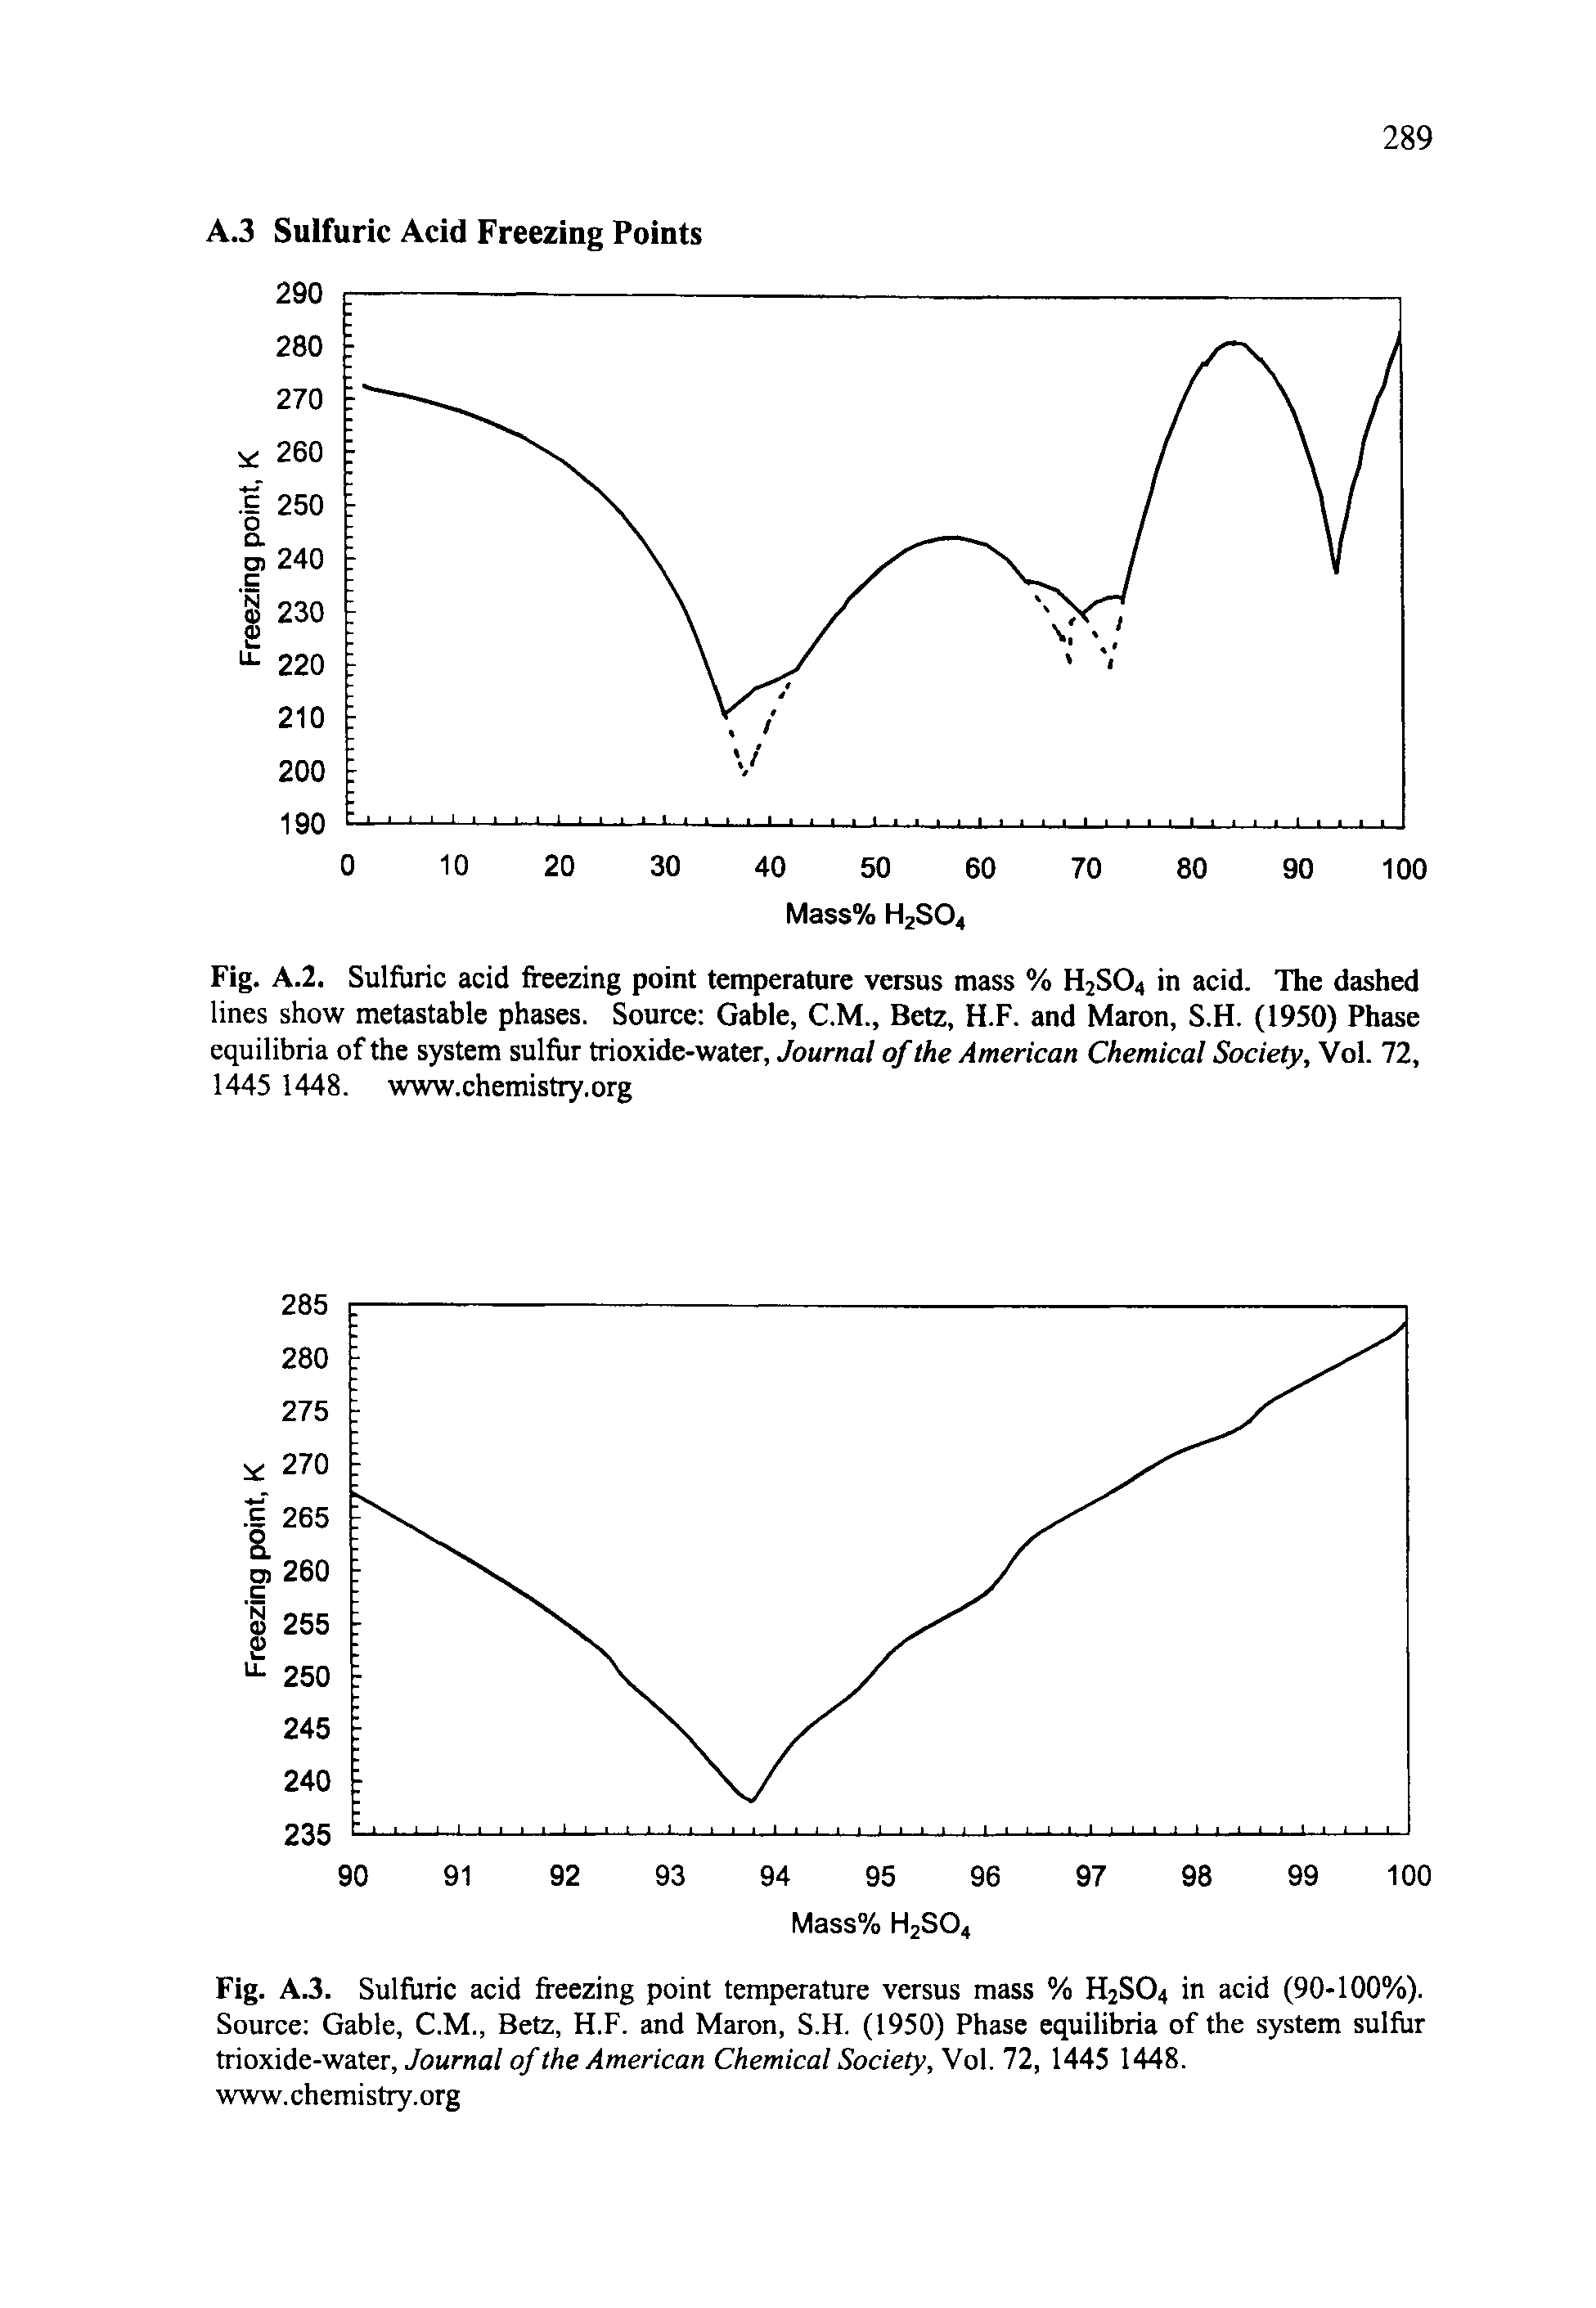 Fig. A.2. Sulfuric acid freezing point temperature versus mass % H2S04 in acid. The dashed lines show metastable phases. Source Gable, C.M., Betz, H.F. and Maron, S.H. (1950) Phase equilibria of the system sulfur trioxide-water, Journal of the American Chemical Society, Vol. 72, 1445 1448. www.chemistry.org...